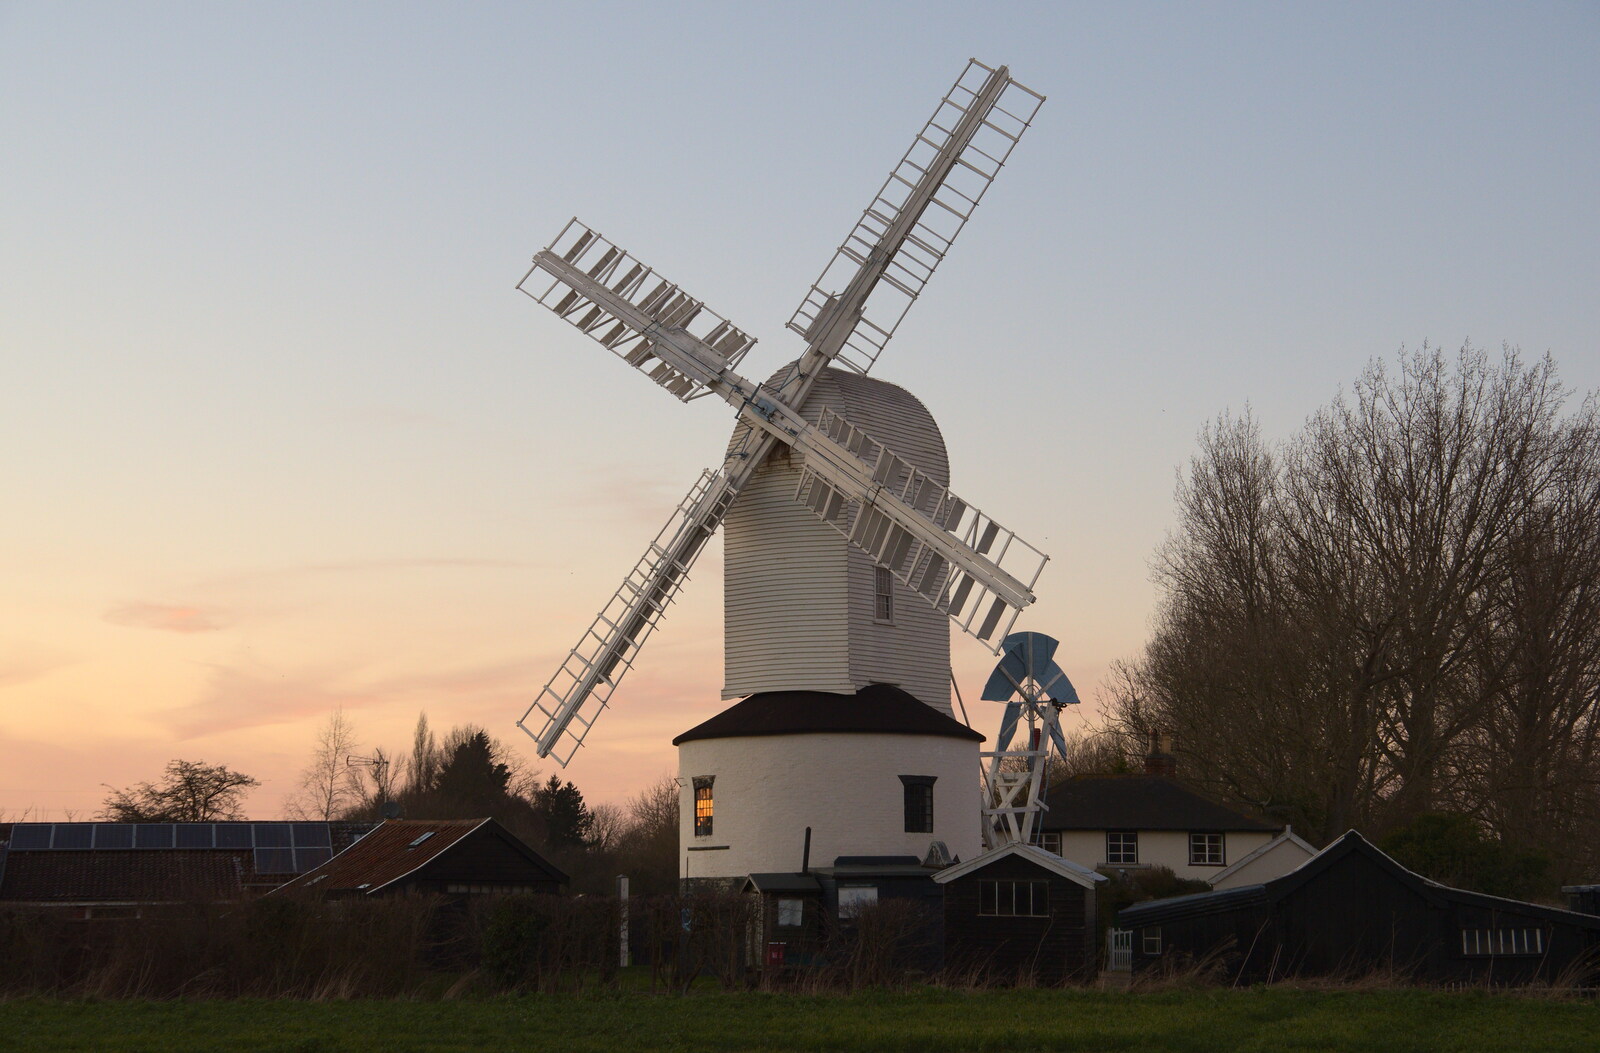 Another view of the post mill in the dusk from A Trip to Orford Castle, Orford, Suffolk - 26th February 2022